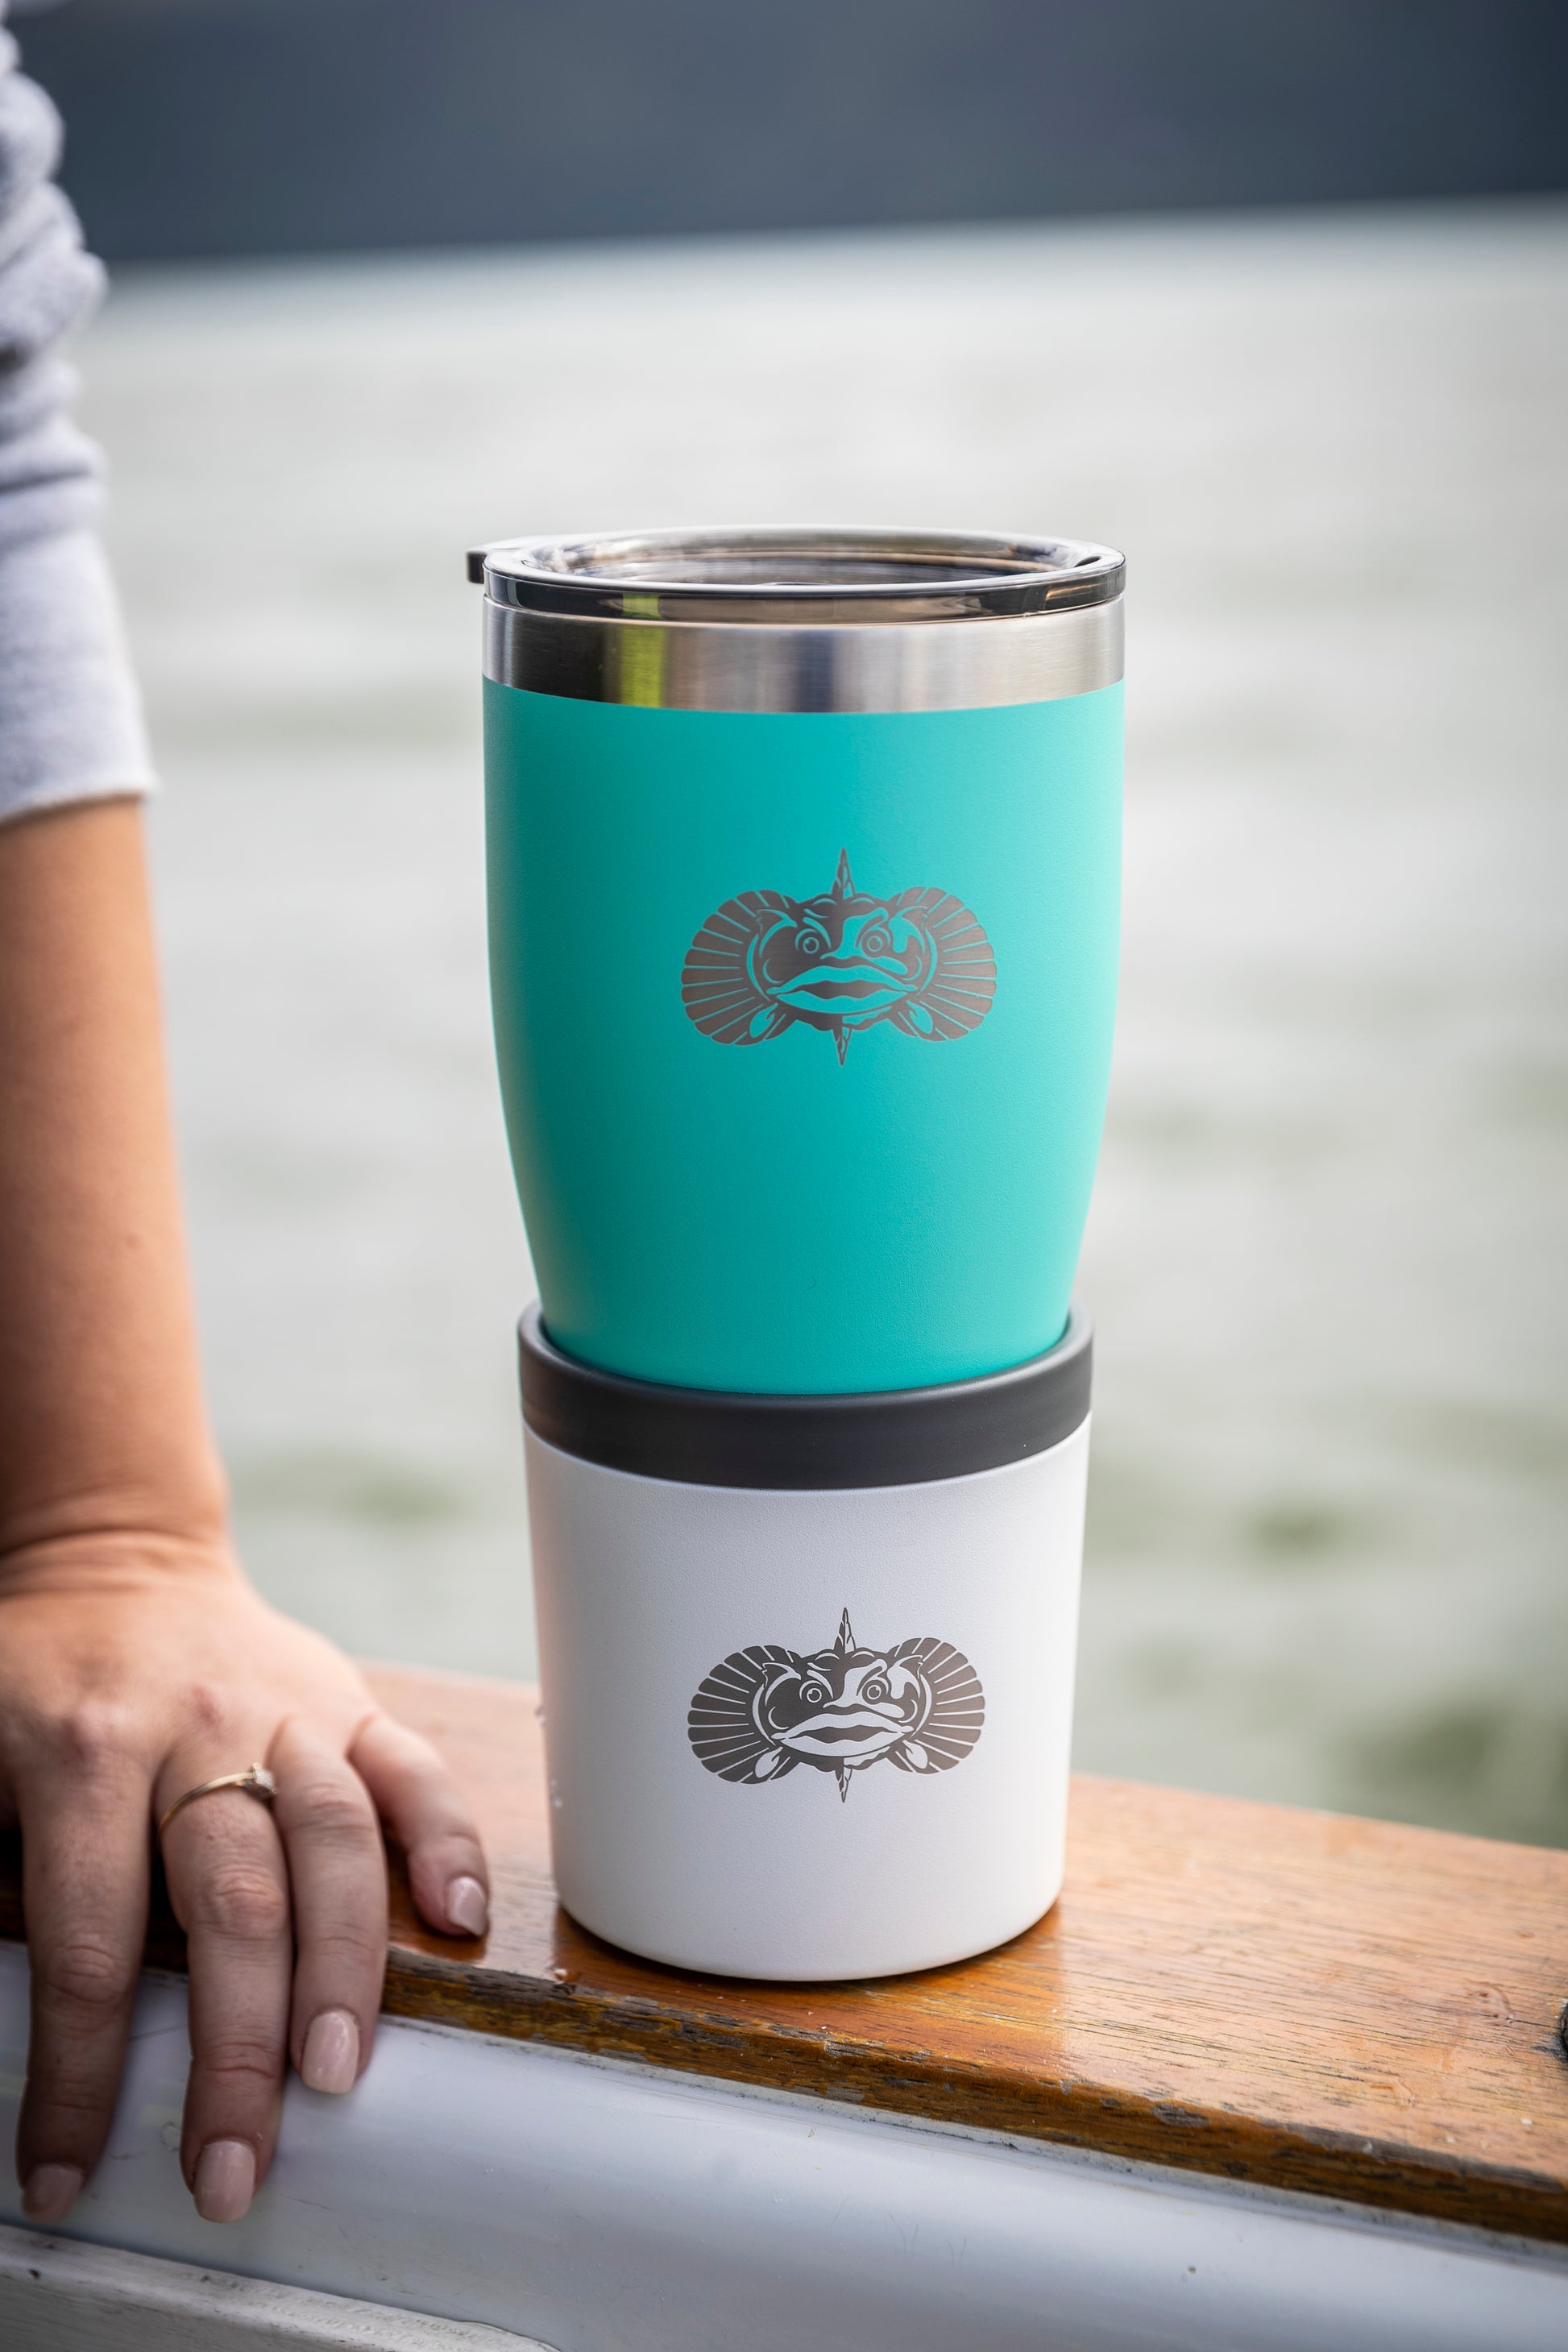 Toadfish Anchor - Non-Tipping Cup Holder Teal